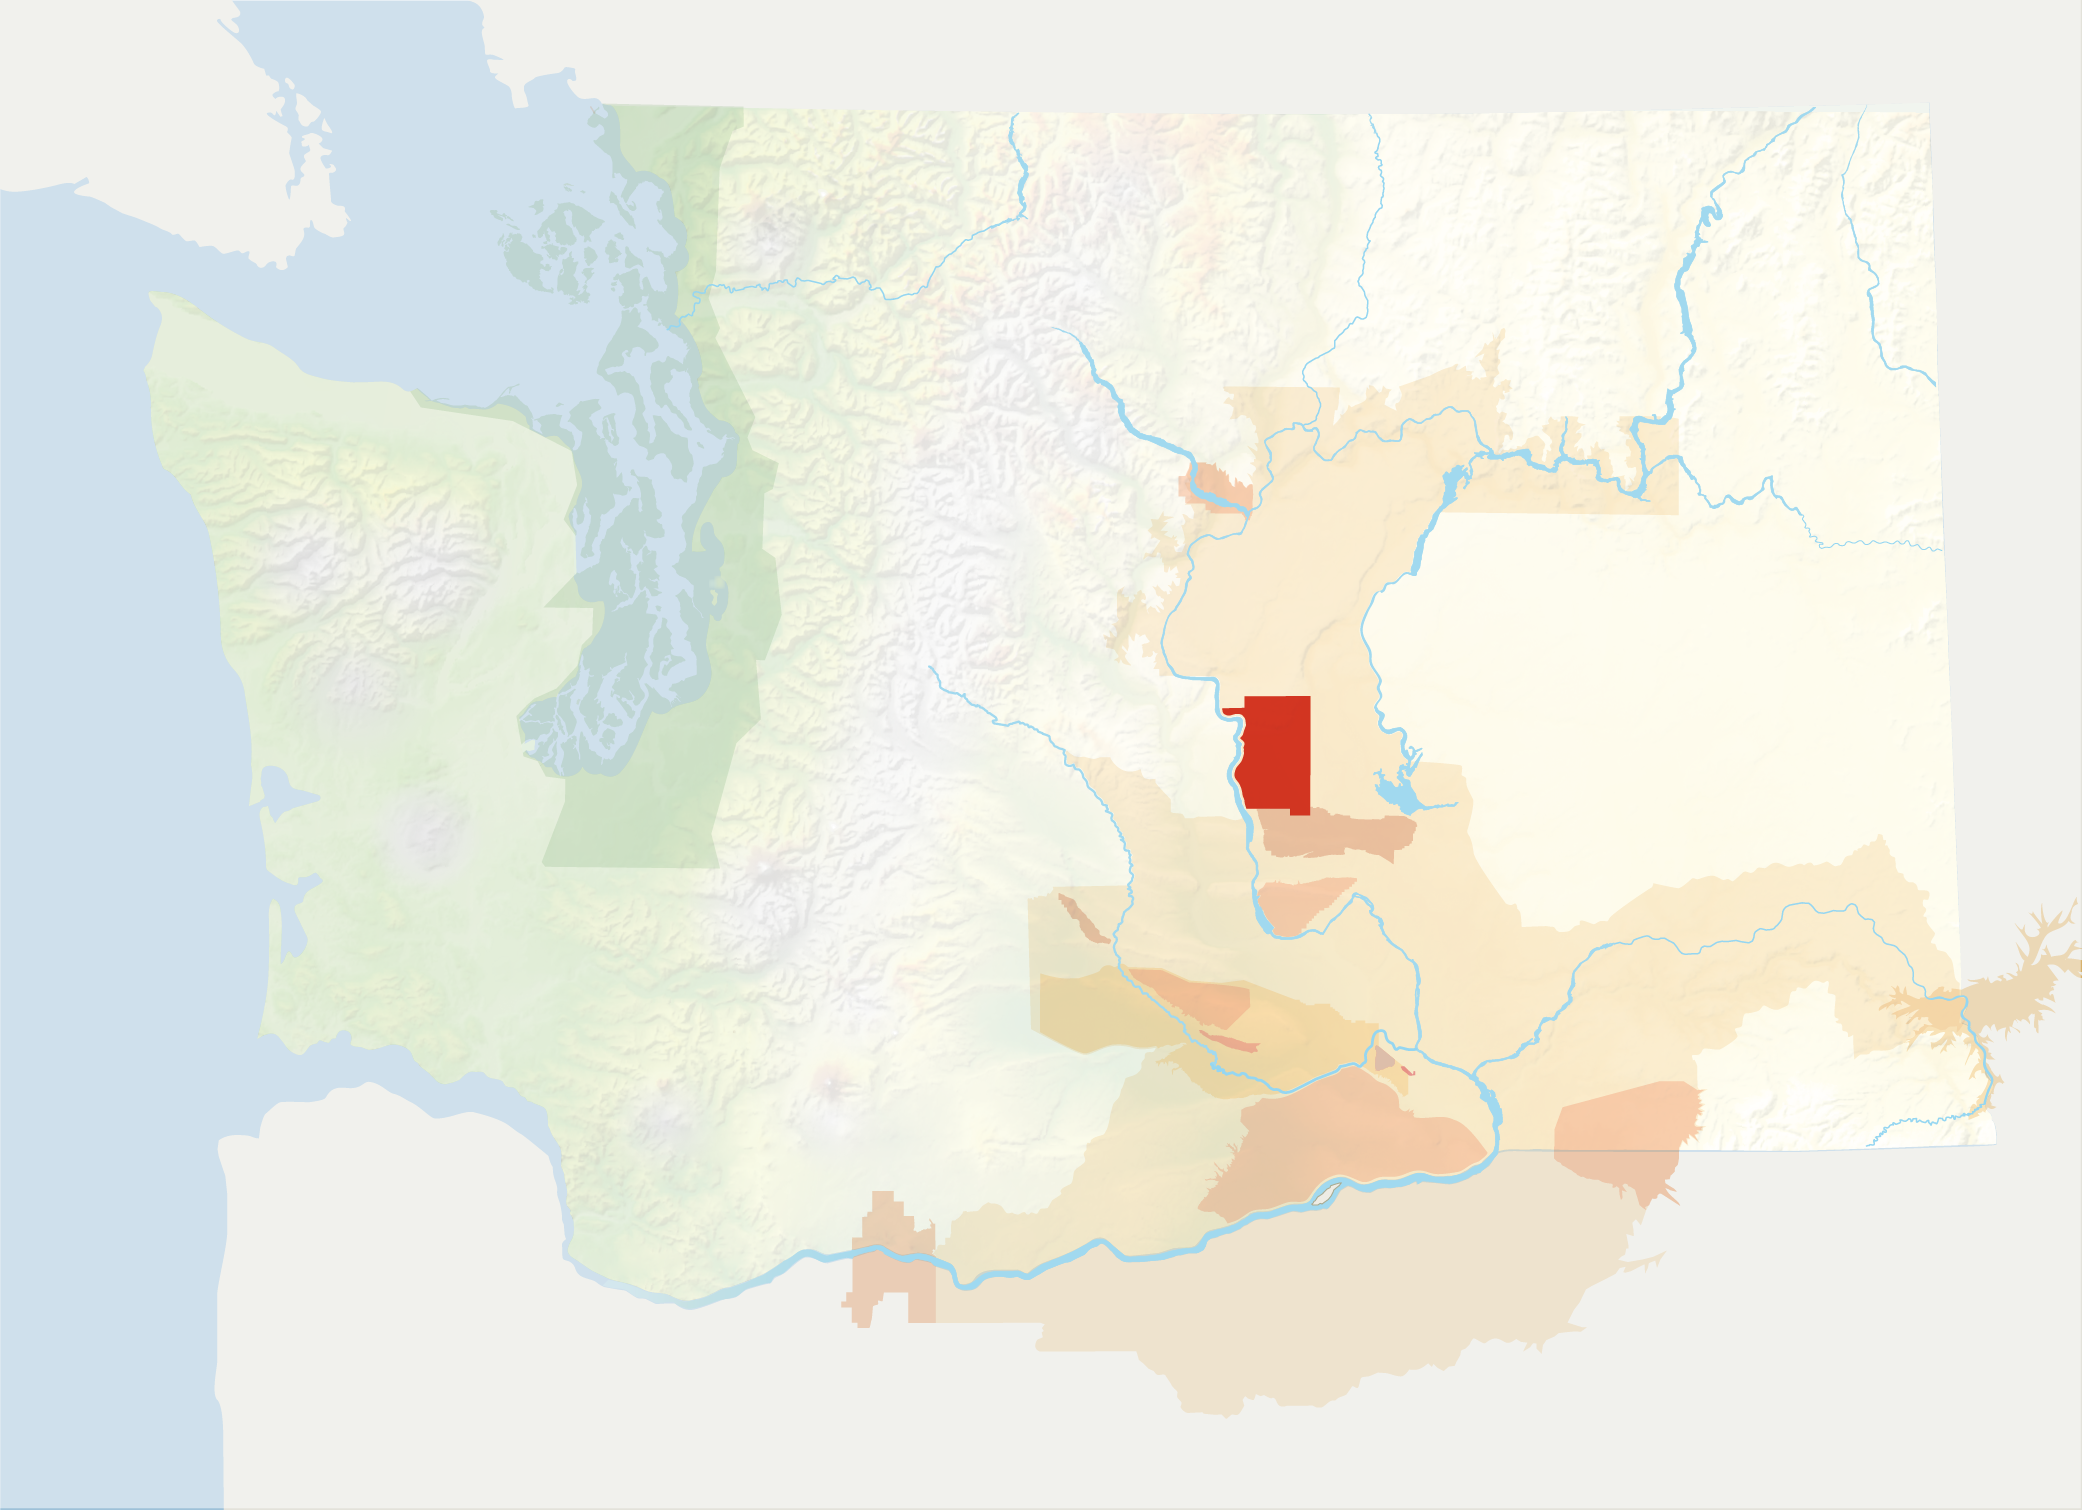 Map of Washington with the Ancient Lakes of Columbia Valley AVA in red, surrounded by the rest of the AVAs in muted greens and oranges.